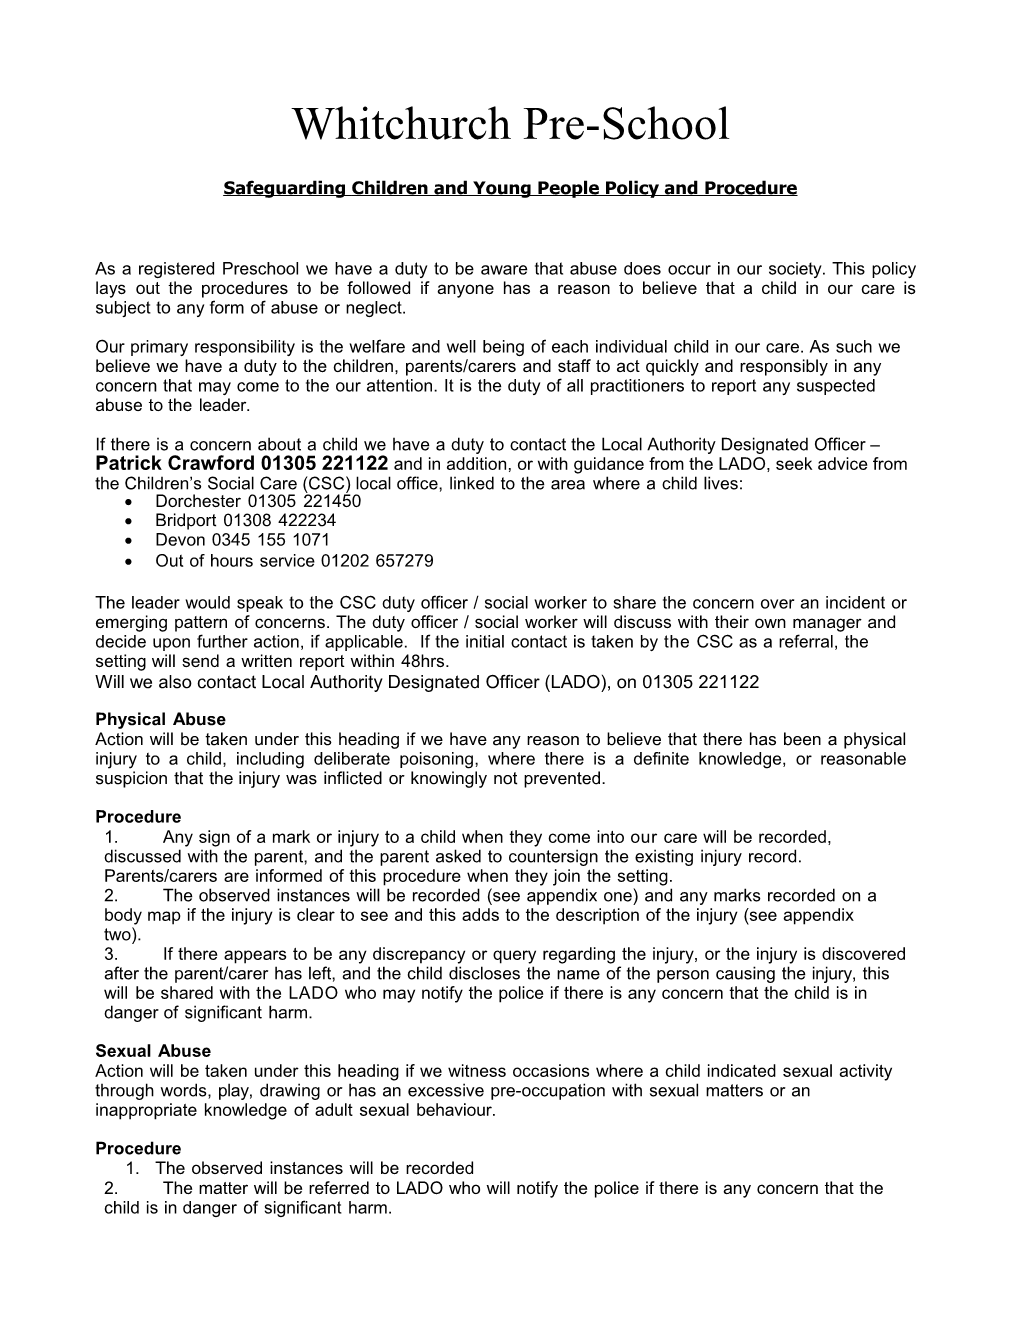 Safeguardingchildren and Young People Policy and Procedure